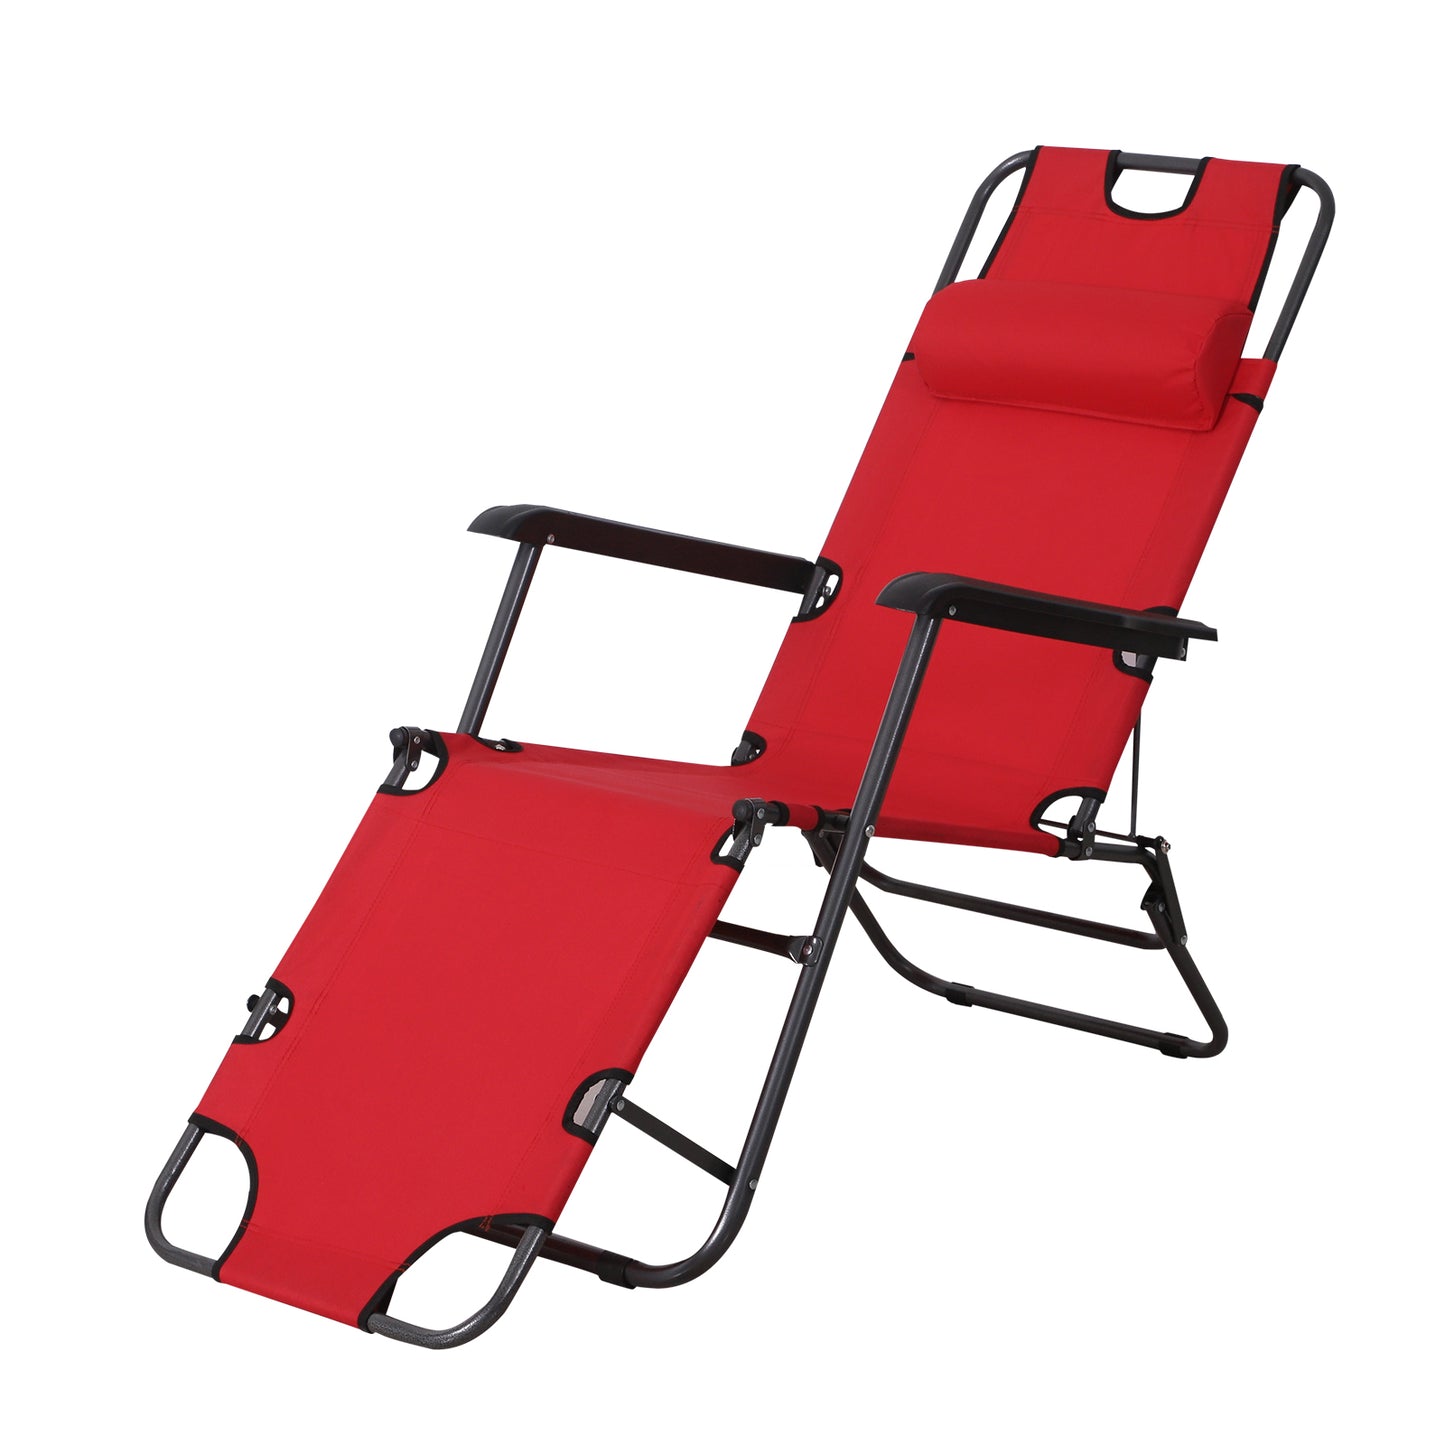 Outsunny Metal Frame 2 In 1 Sun Lounger w/ Pillow Red